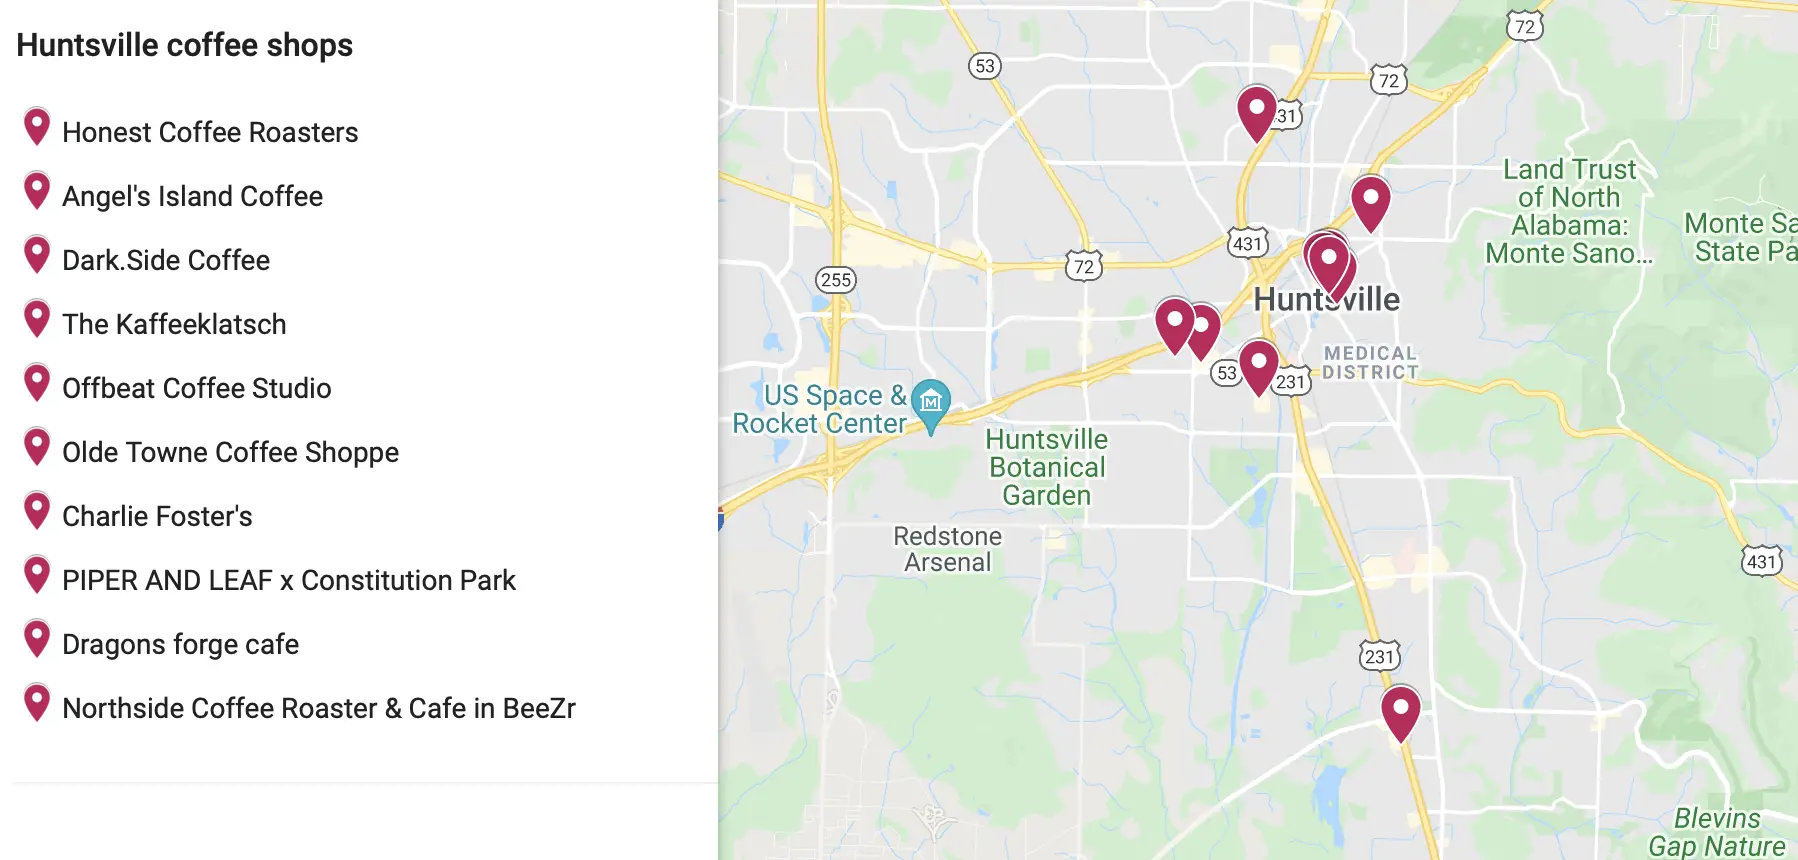 map of 10 recommended craft coffee shops in Huntsville Alabama